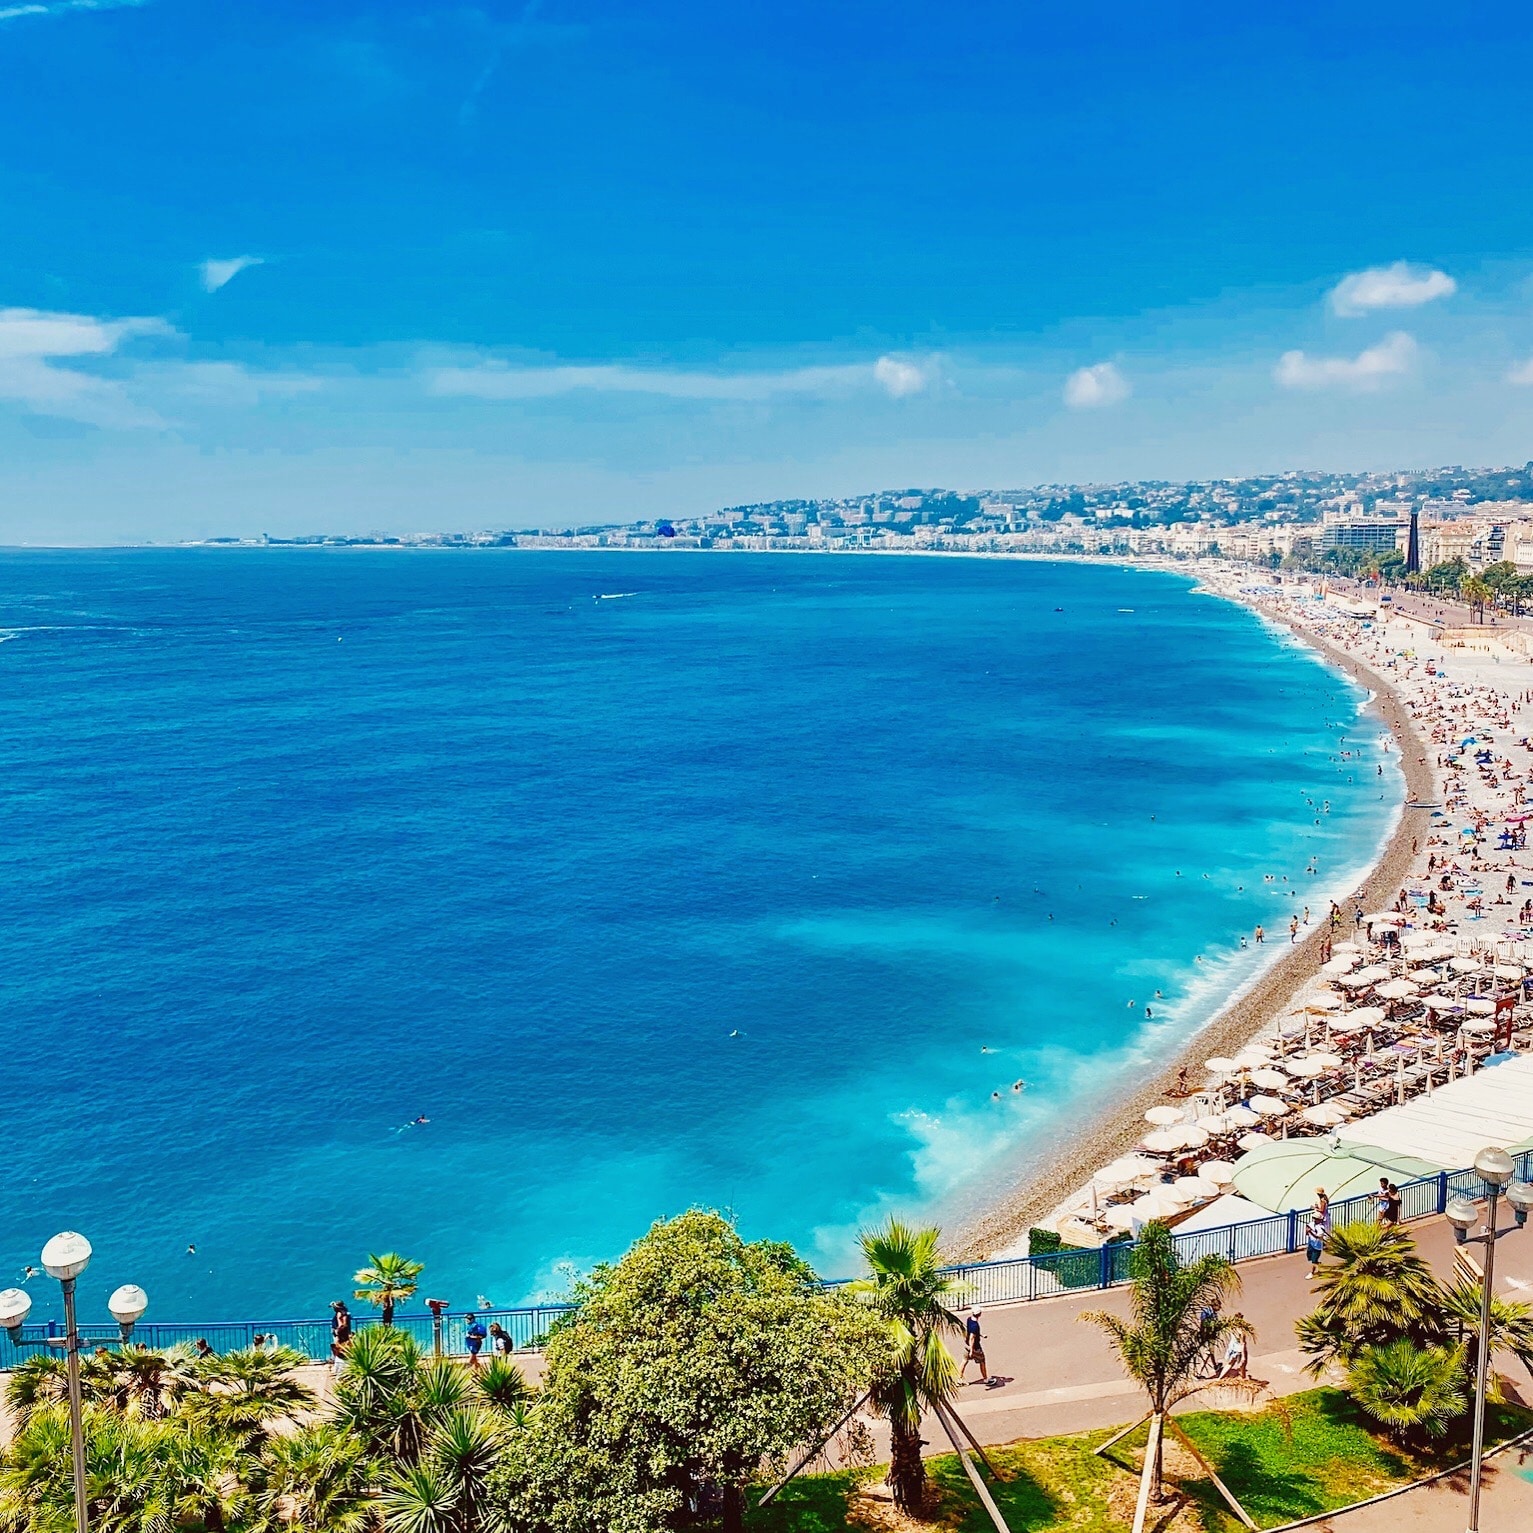 French Riviera: Where to Find Historic and Contemporary Art in Nice